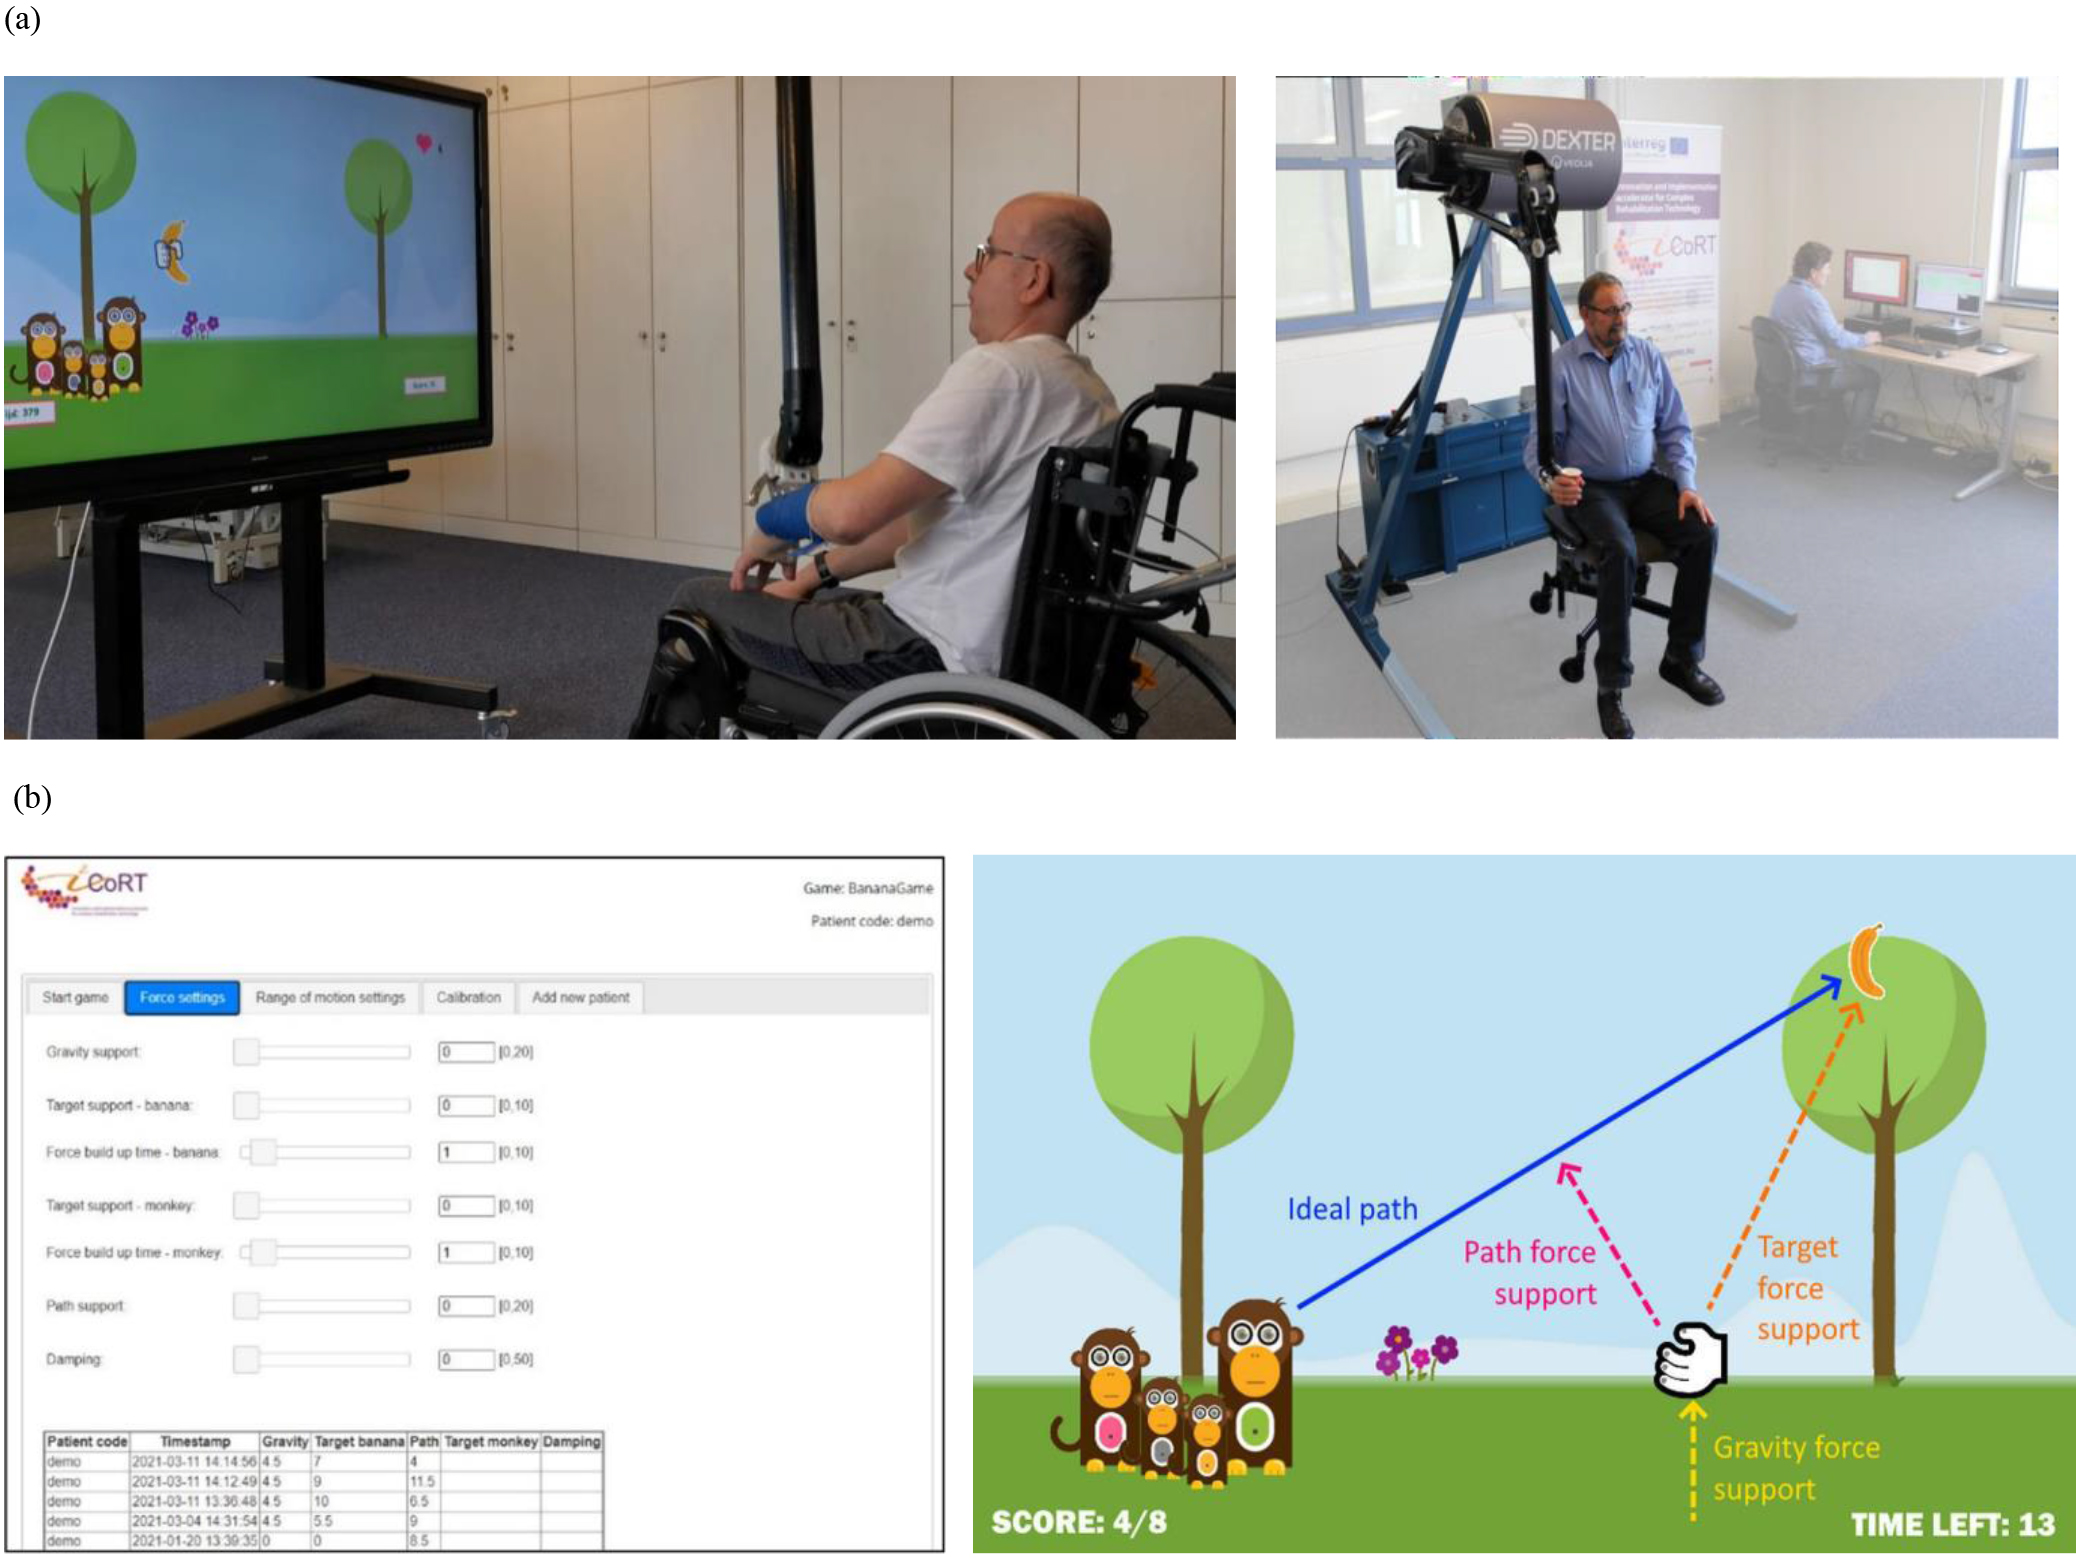 (1a) DexterTM training set-up and (1b) therapist interface & example of force directions. (1a) The left picture shows the training set-up with a patient. The right picture shows the DexterTM device itself, and the technical expert with the necessary computers in the background. (1b) The left picture shows the interface through which the therapist can set and change training settings of the DexterTM device. The right picture illustrates the different forces that can be defined in a game and can be personalized for each patient.